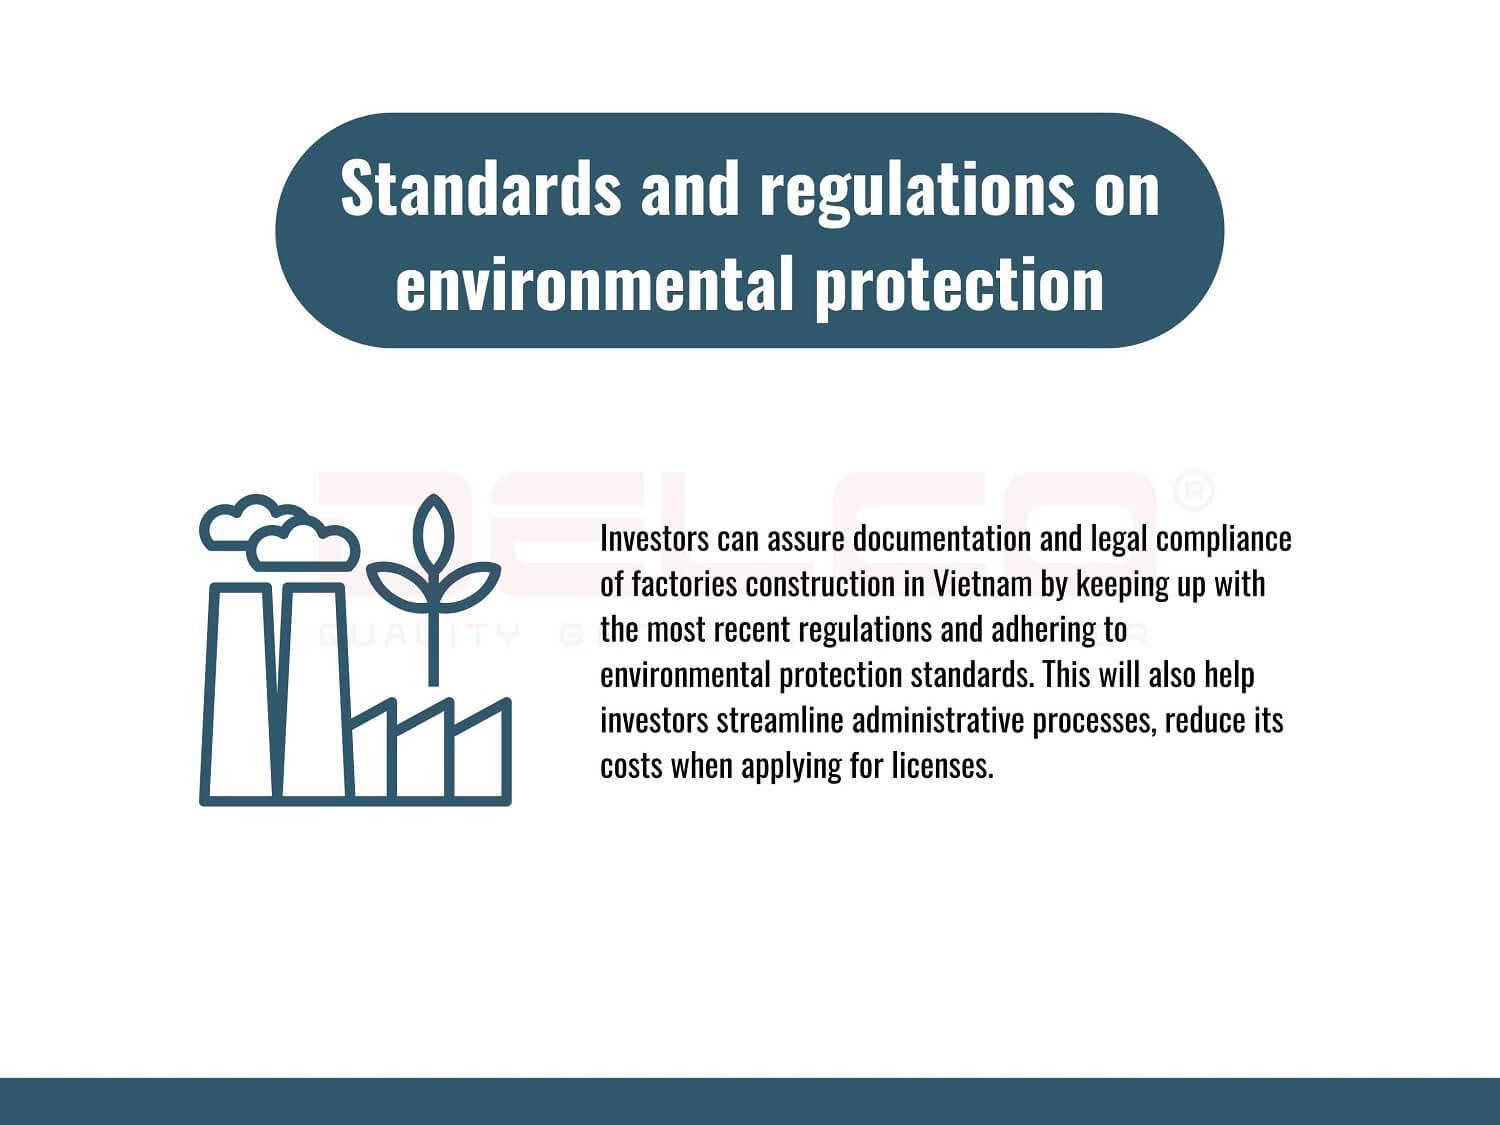 Standards and regulations on environmental protection